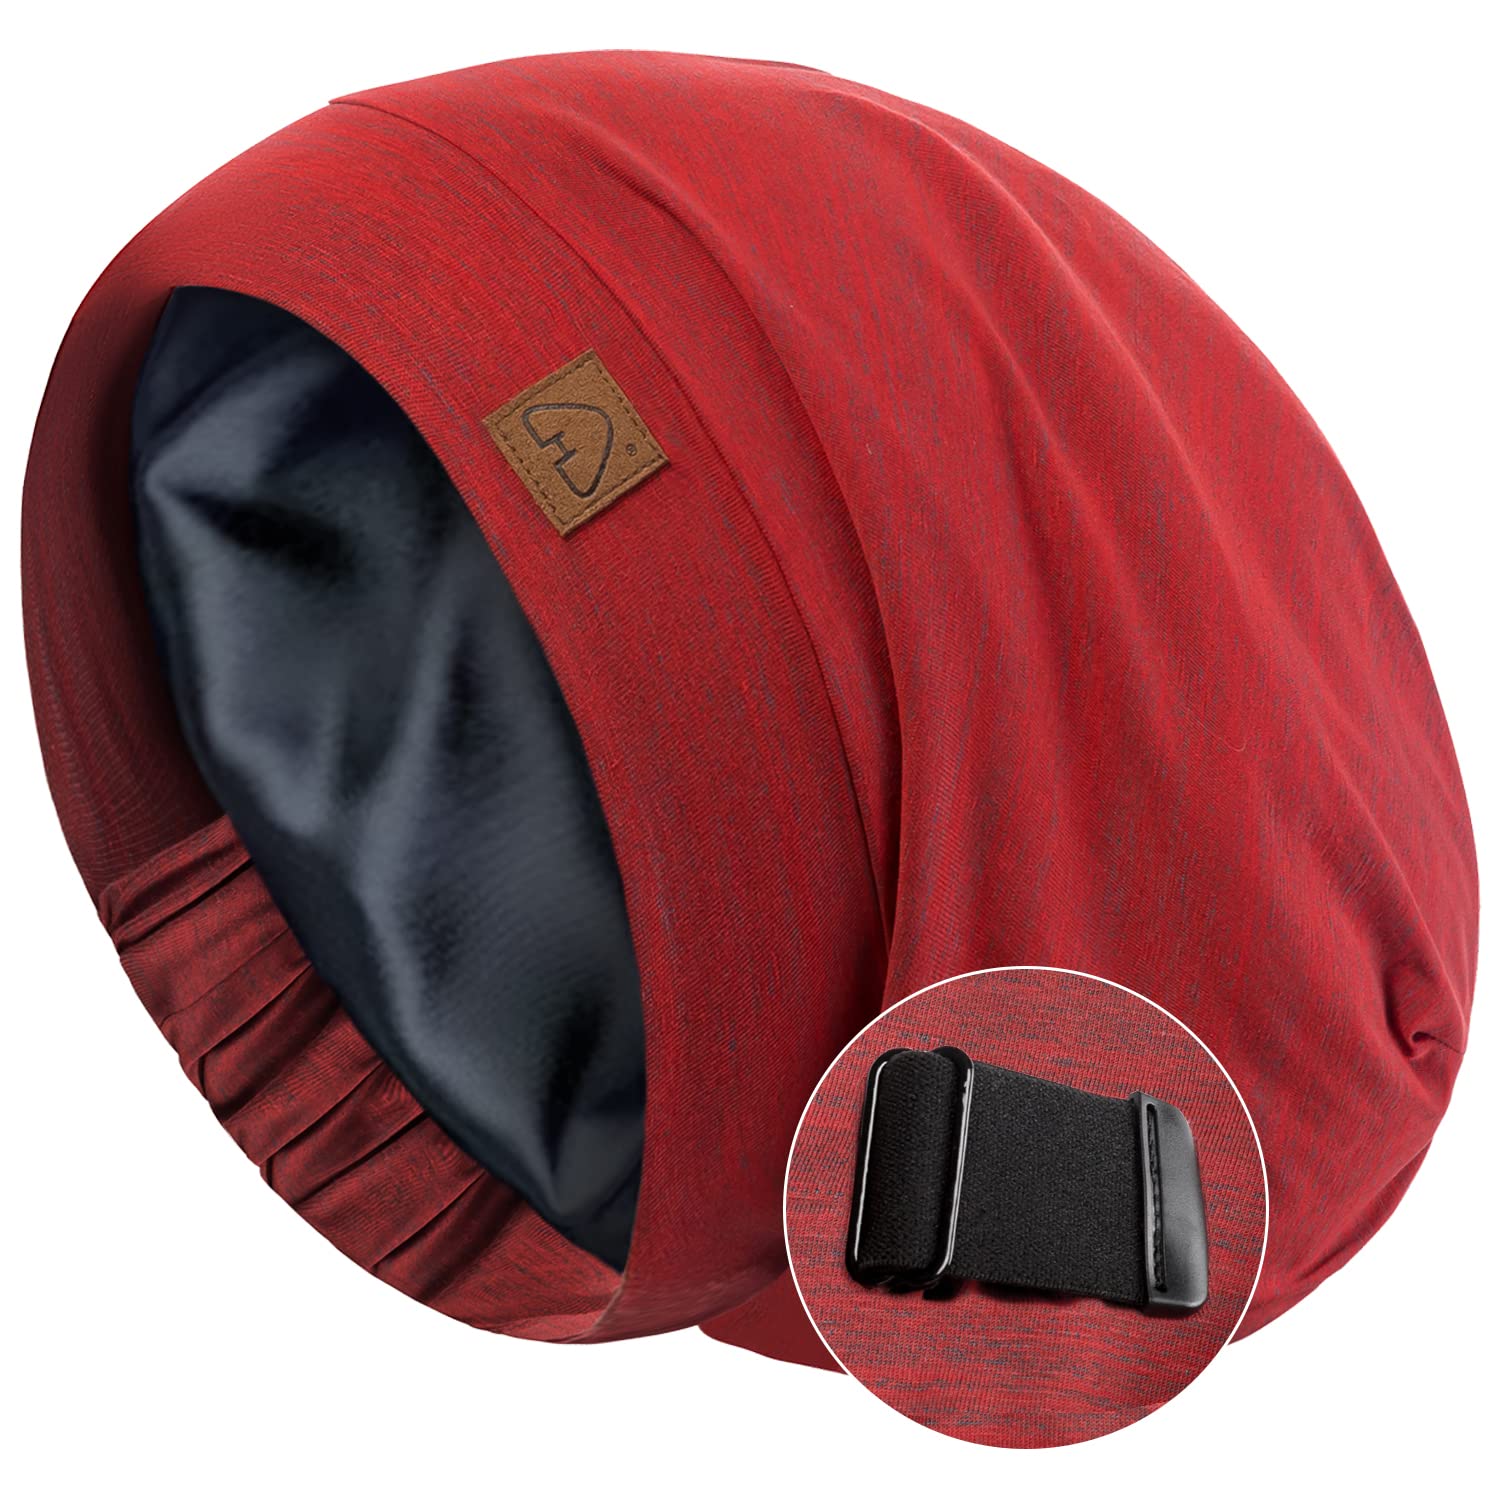 Red Burgundy Satin-Lined Beanie for Women and Men - Soft and Warm Beanie  with Satin Lining to Protect Hair